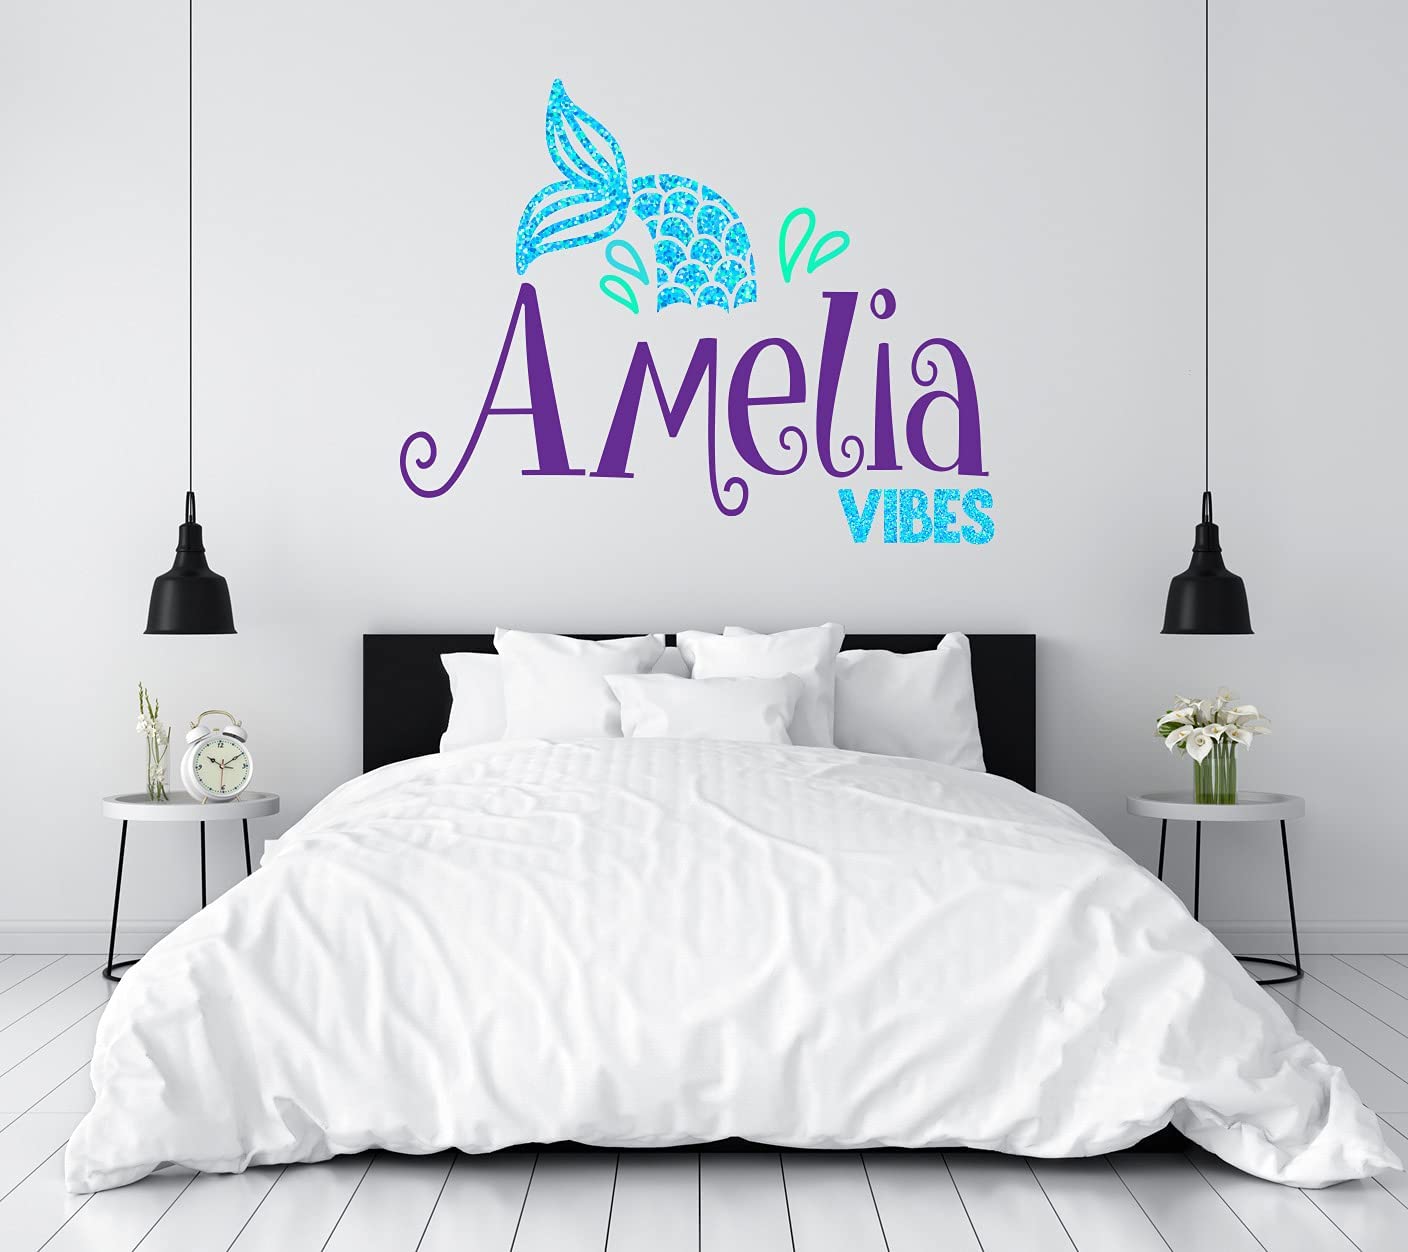 Mermaid Custom Name Wall Decal - Girls Personalized Name Mermaid Tail Wall Sticker - Sparkle Mermaid Wall Decor - Girls Personalize Name Wall Art Sticker - Wall Decal for Nursery Playroom Bedroom Decoration (Wide 15"x11" Height)